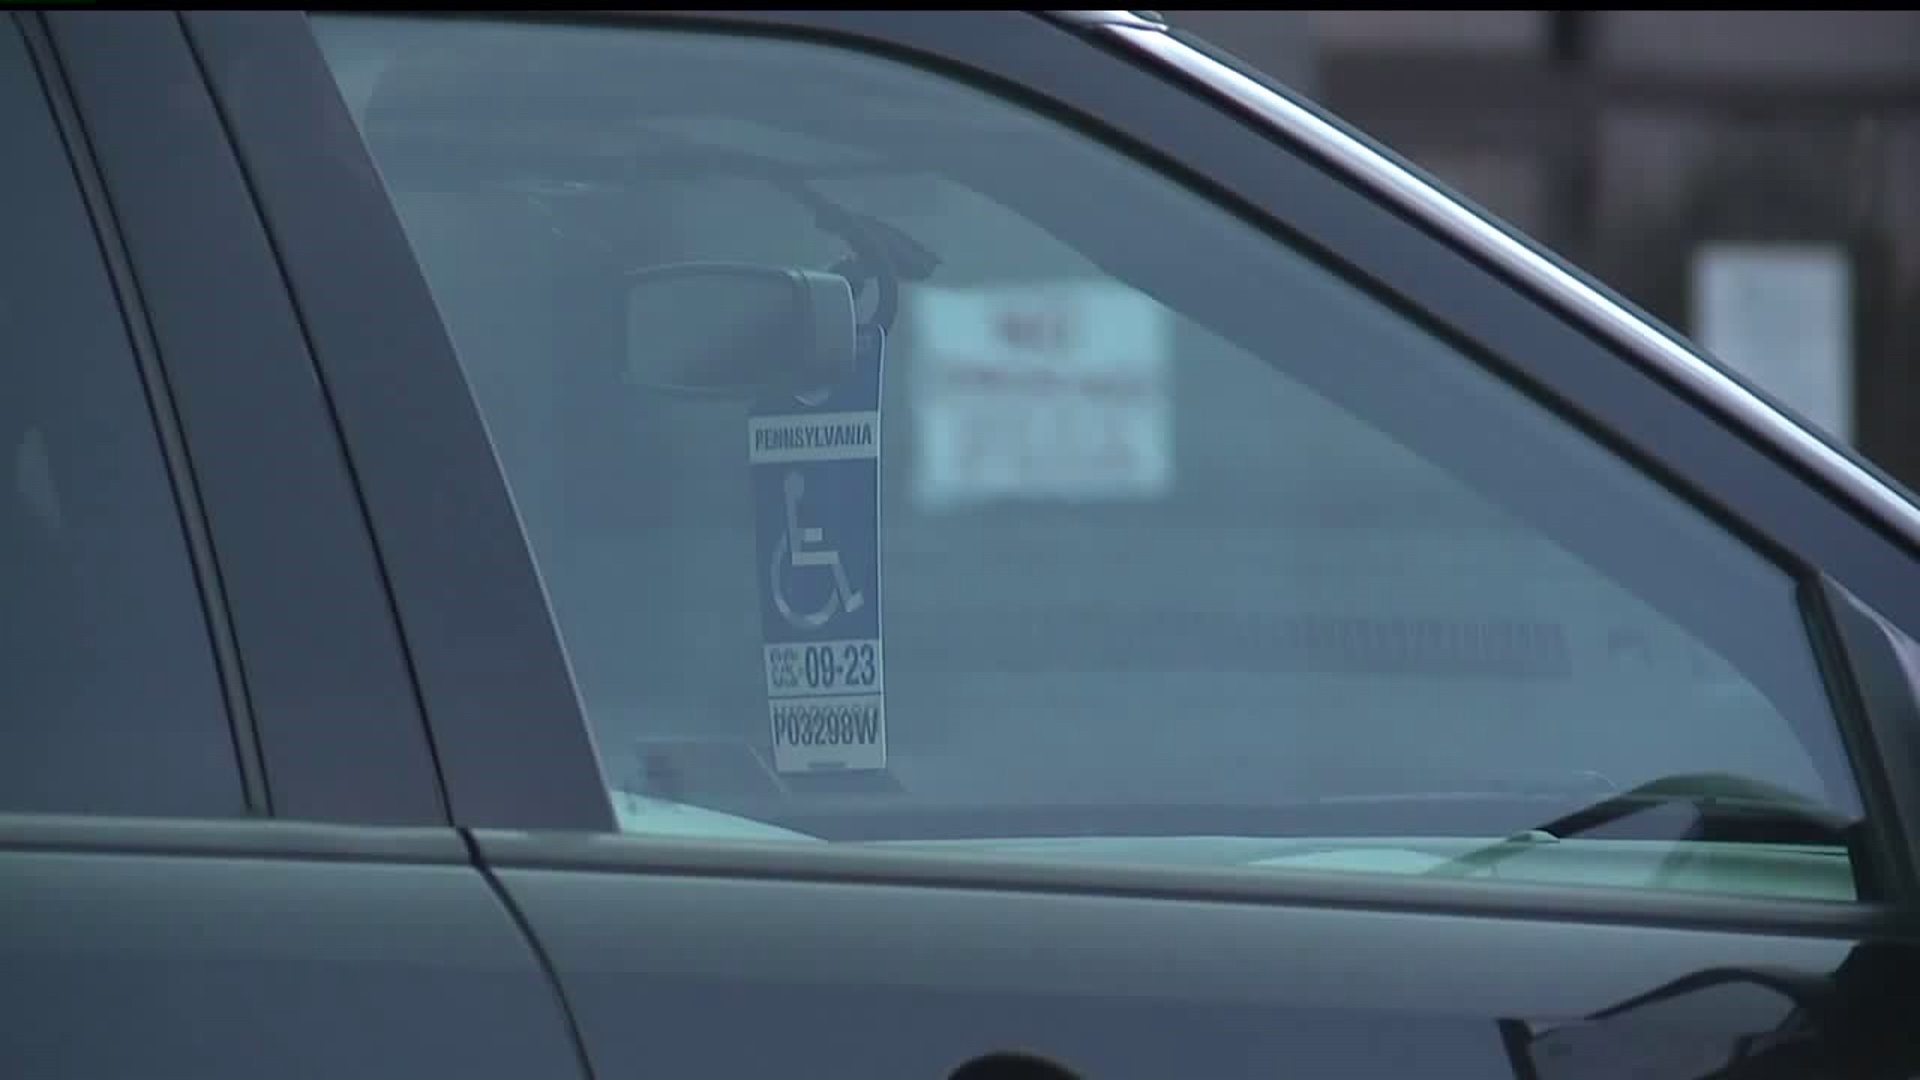 Penndot employees accused of stealing handicap placards